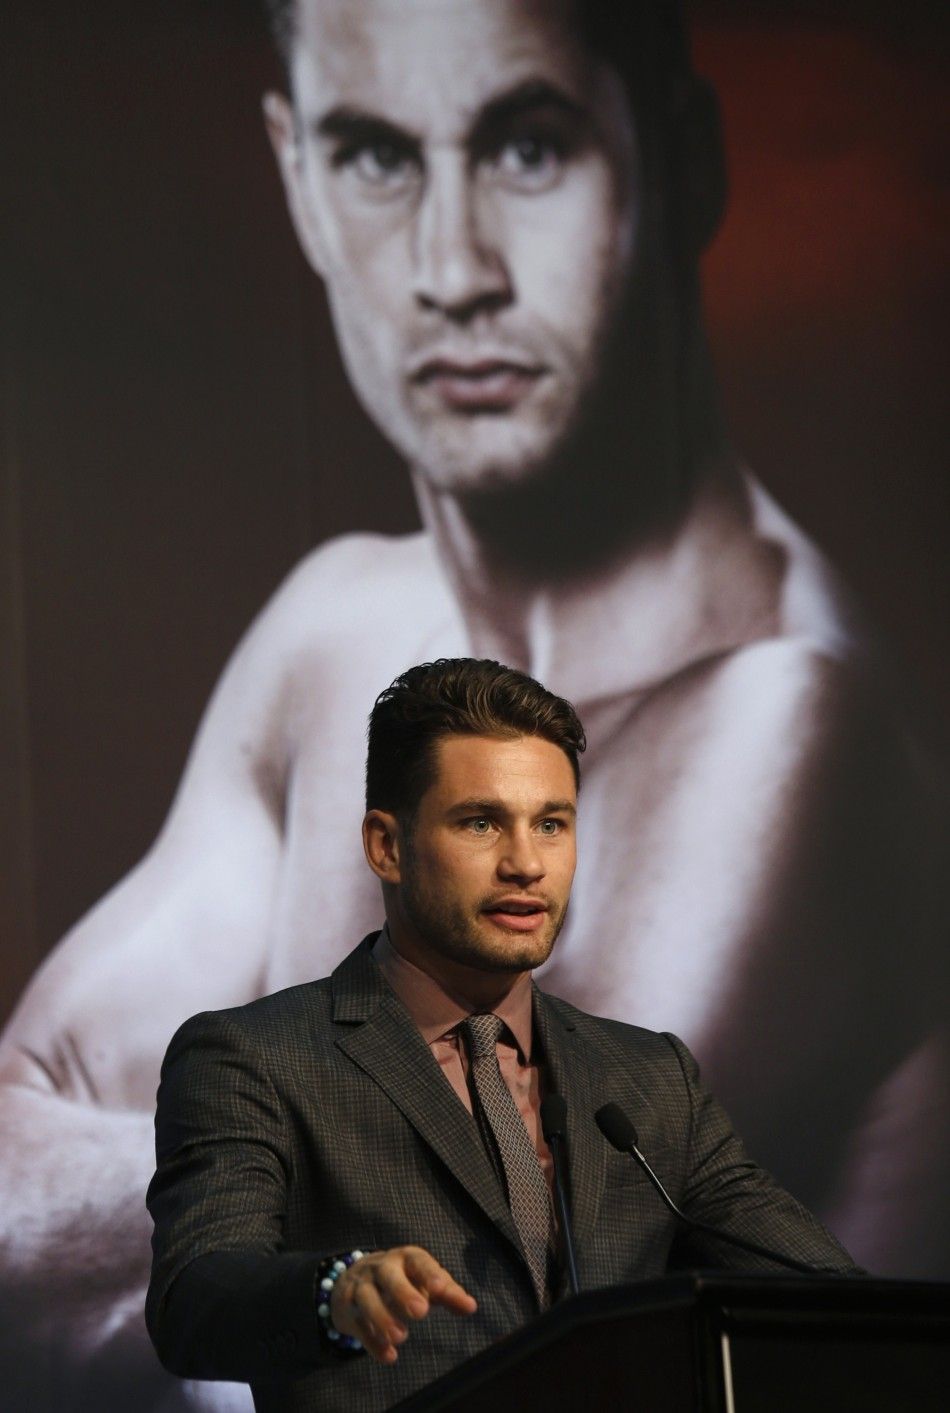 Chris Algieri from the United States attends a news conference at Venetian Macao 